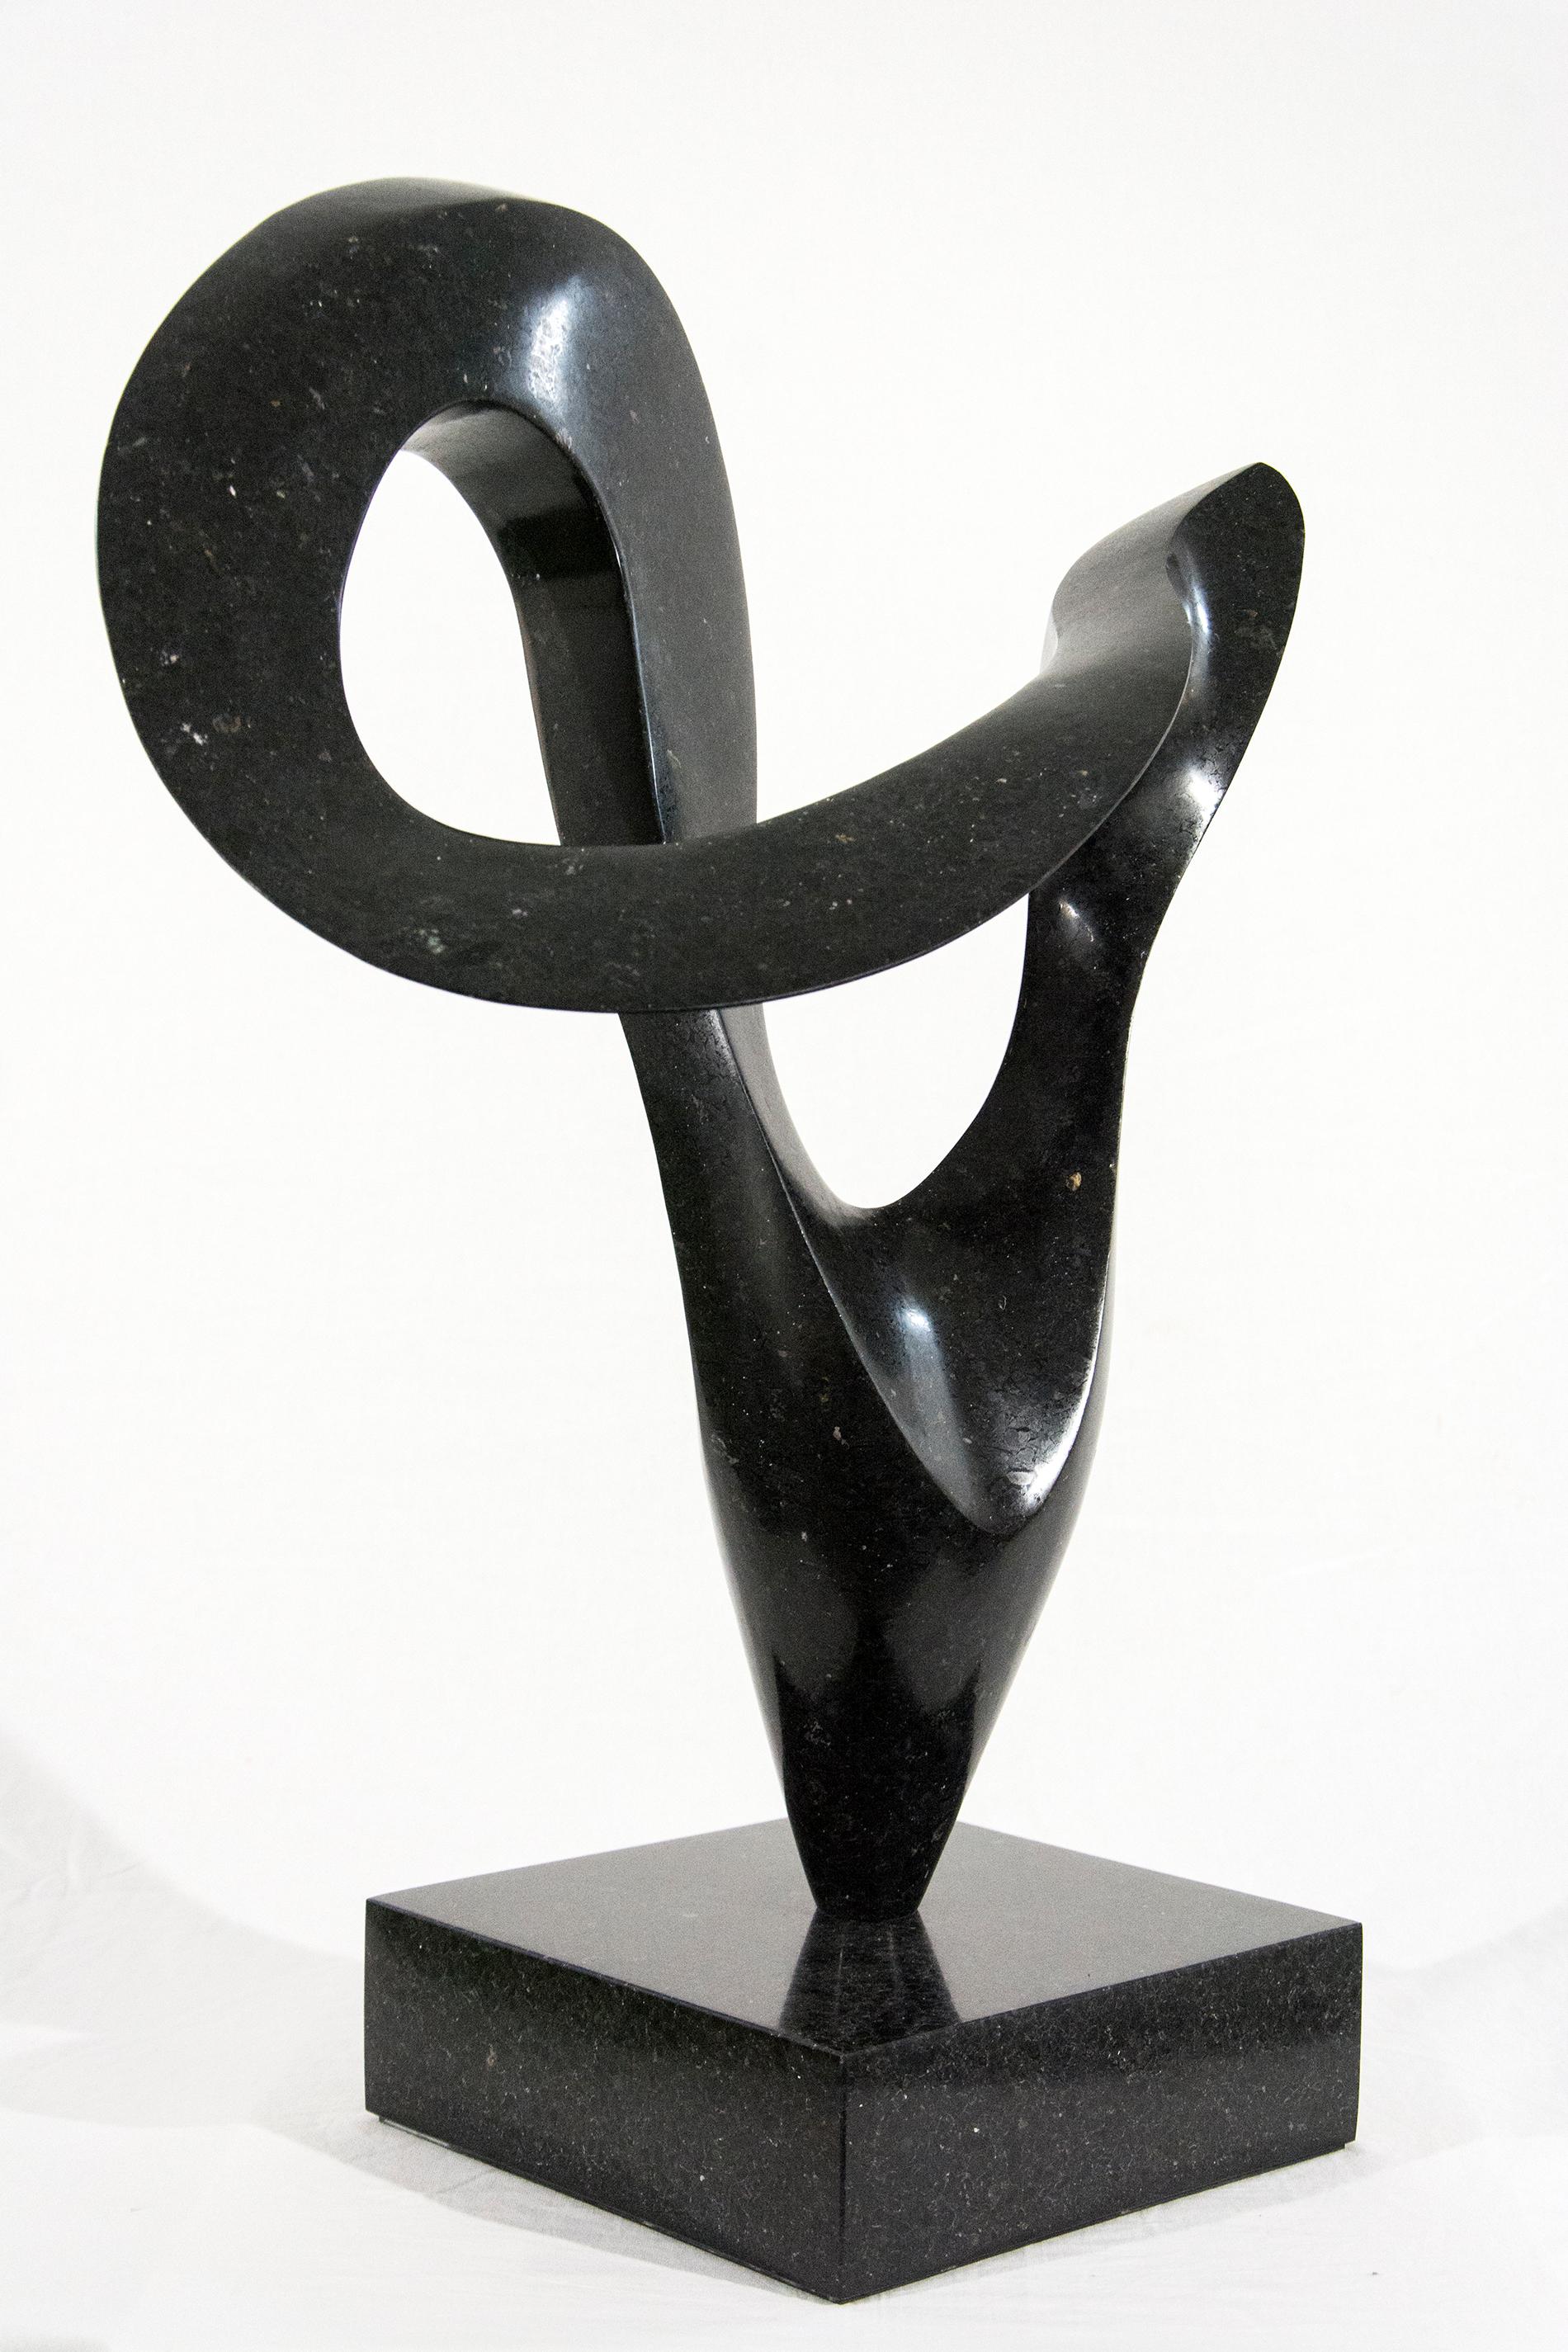 Smooth surfaced, engineered black granite is sculpted into an elegant, spinning form by Jeremy Guy. This lively shape that appears to spin dynamically on its narrow base, like a pirouette on one foot, is mounted on a granite base. It is number 18 in